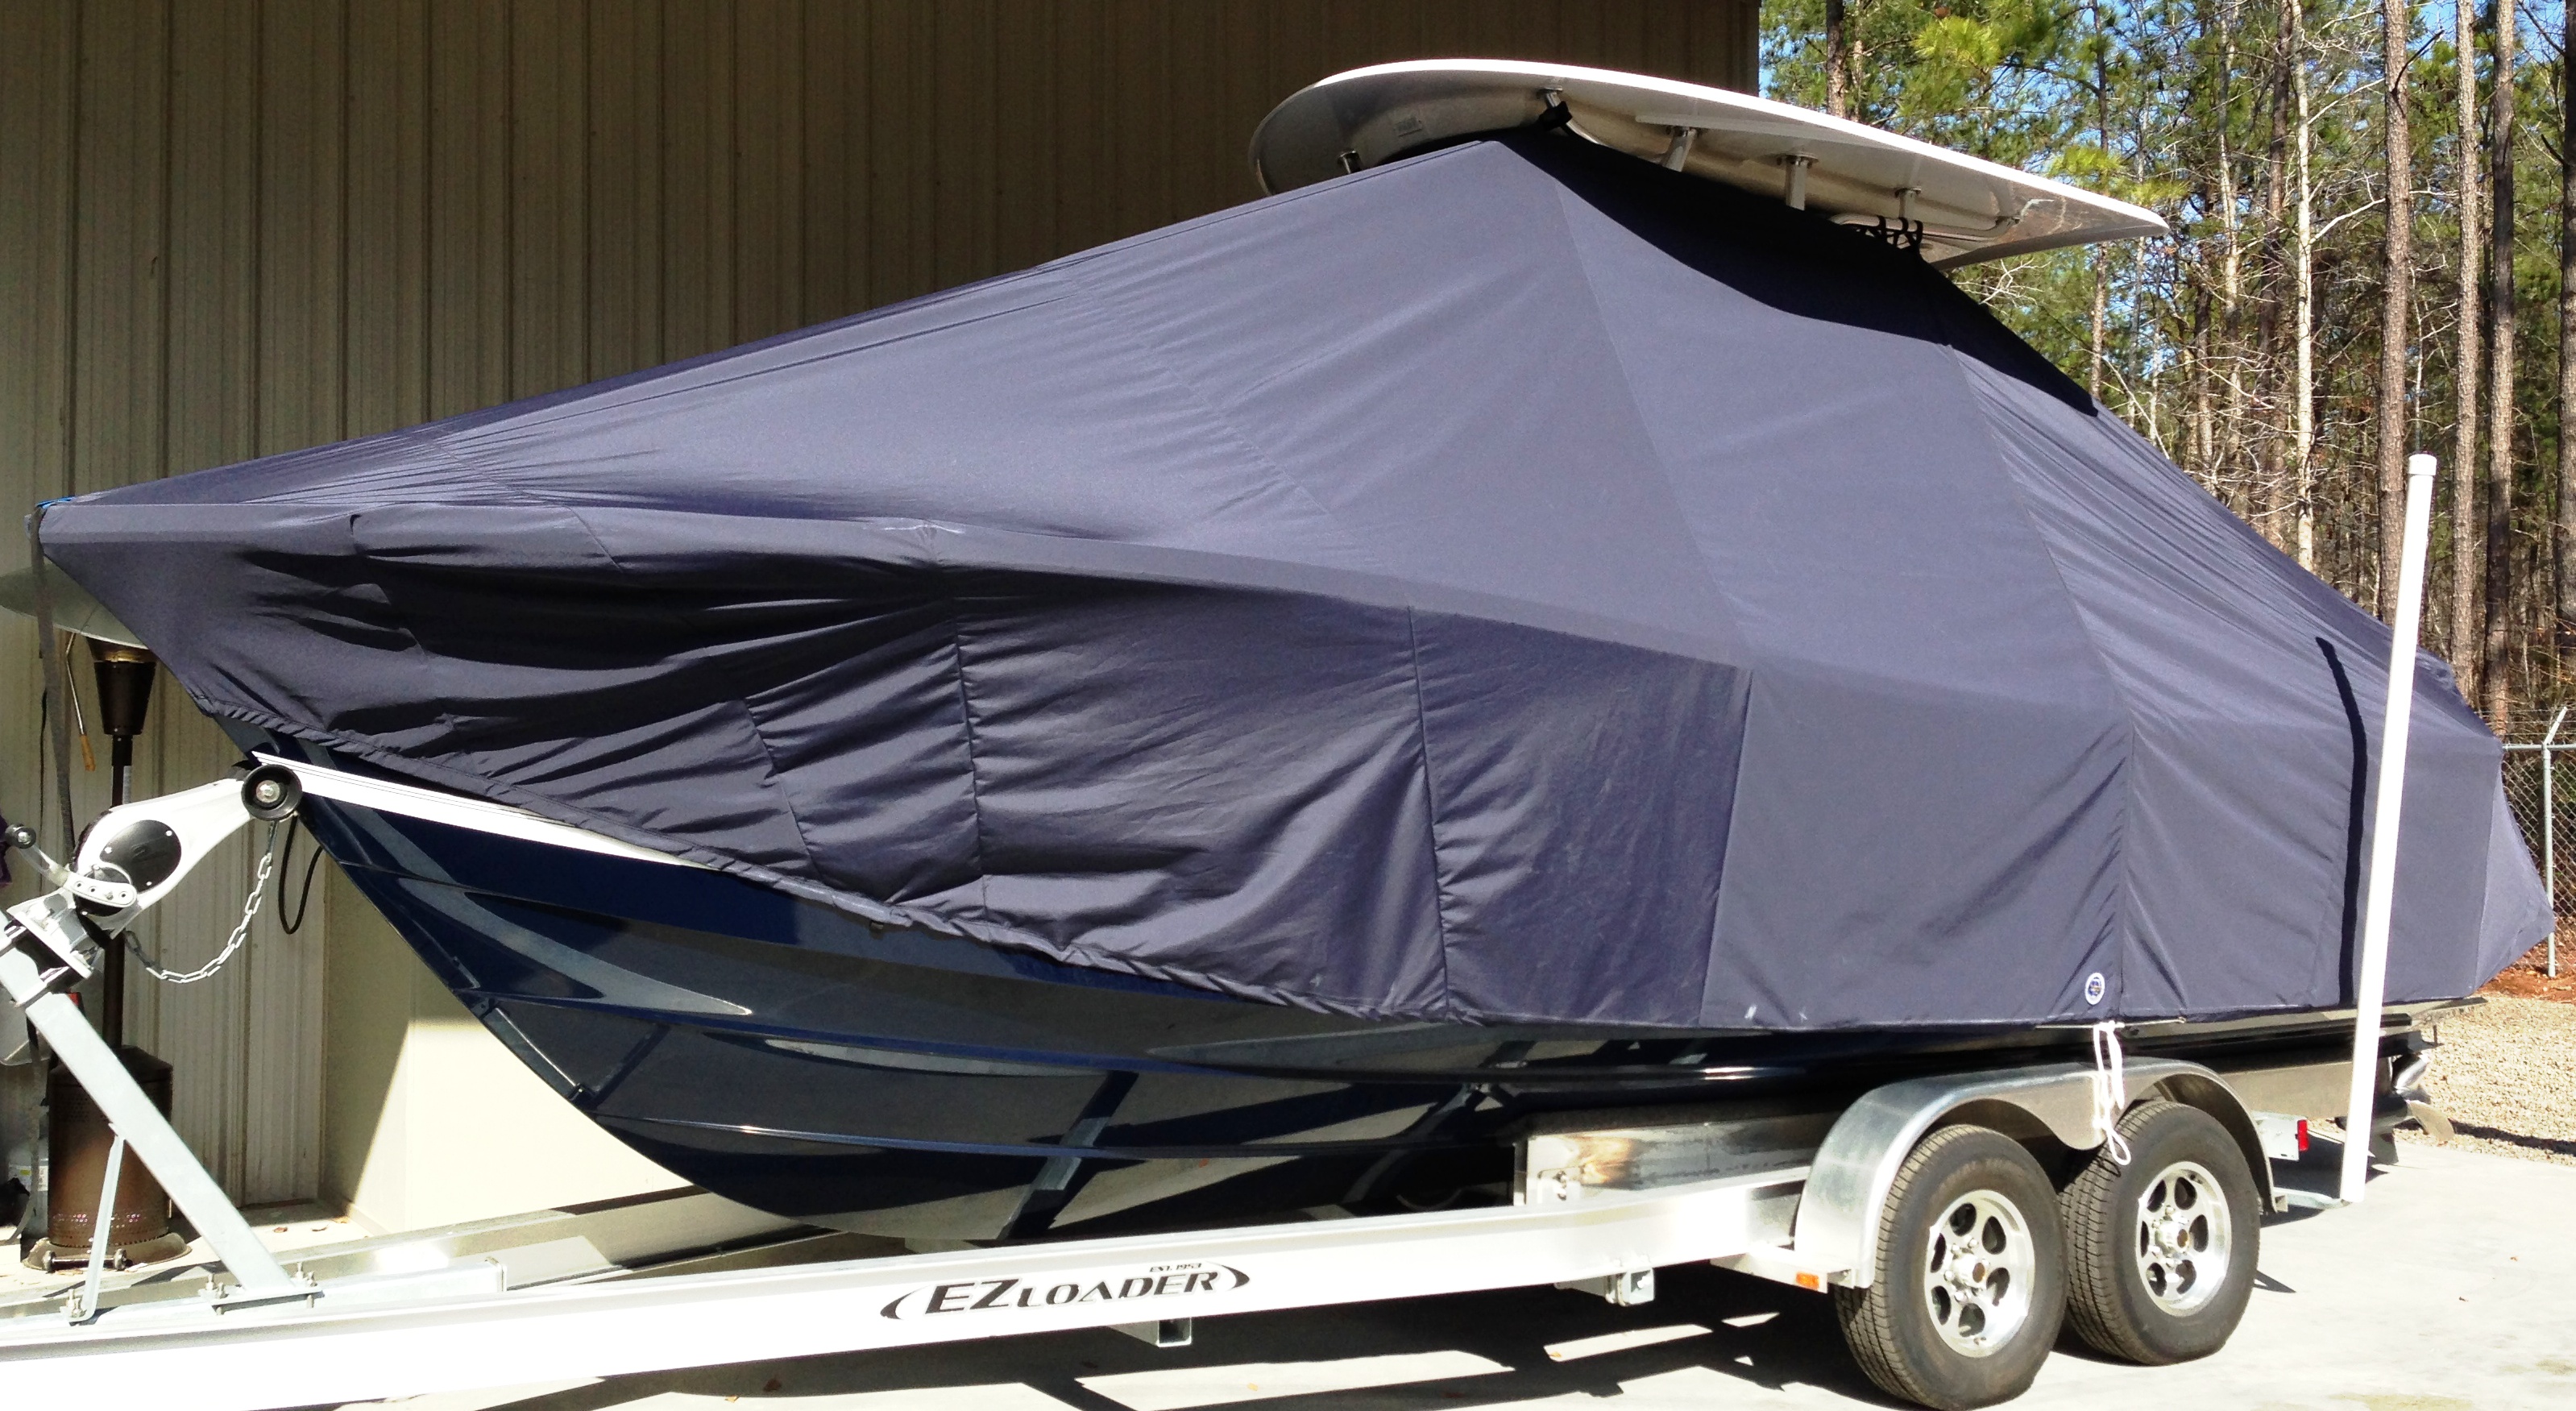 Regulator 23FS, 2013, TTopCovers™ T-Top boat cover, port front